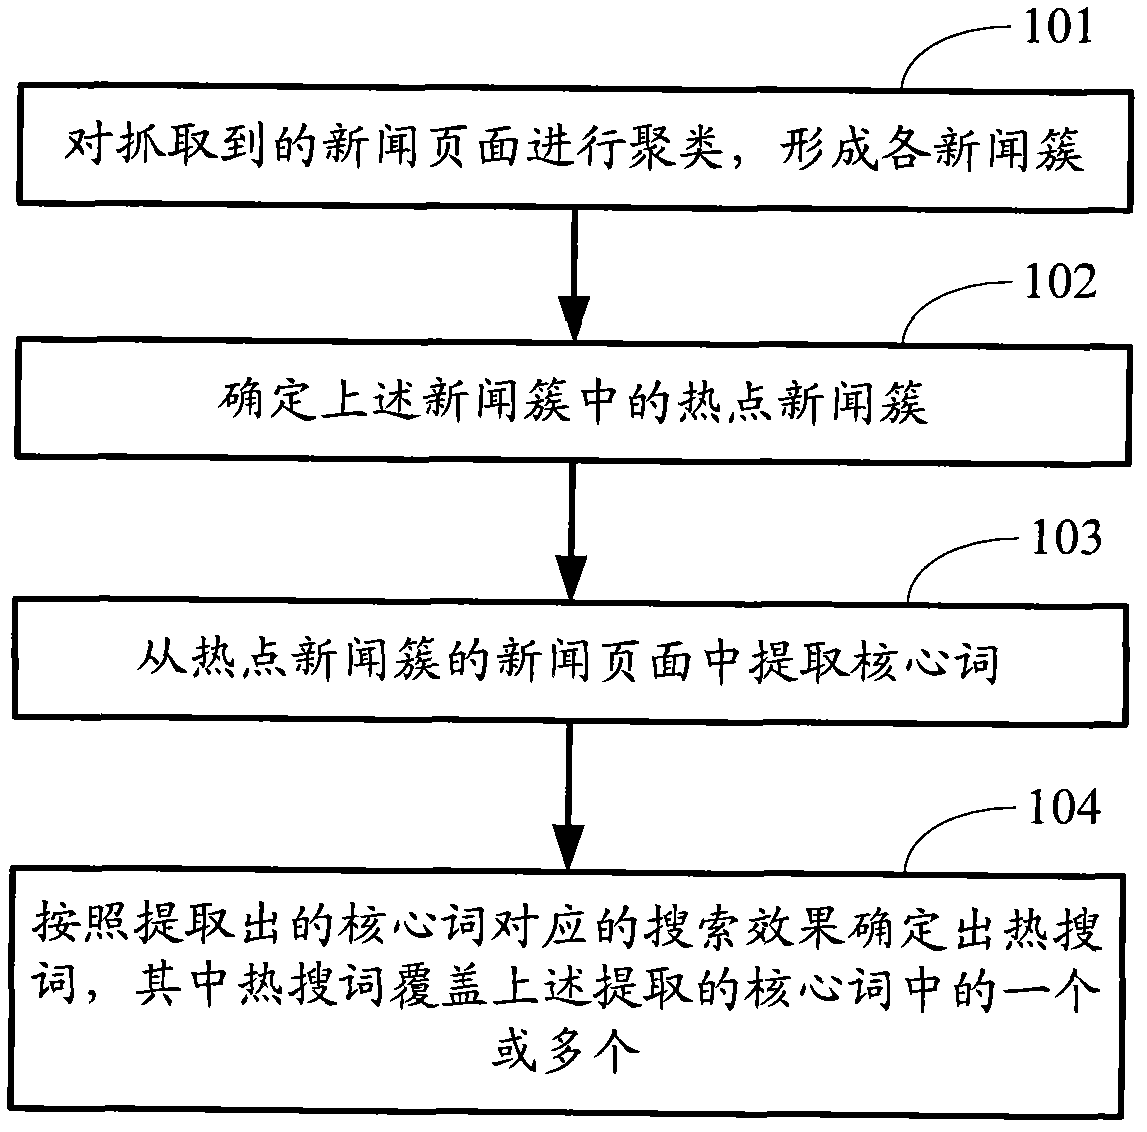 Method and system for generating hot-searching word